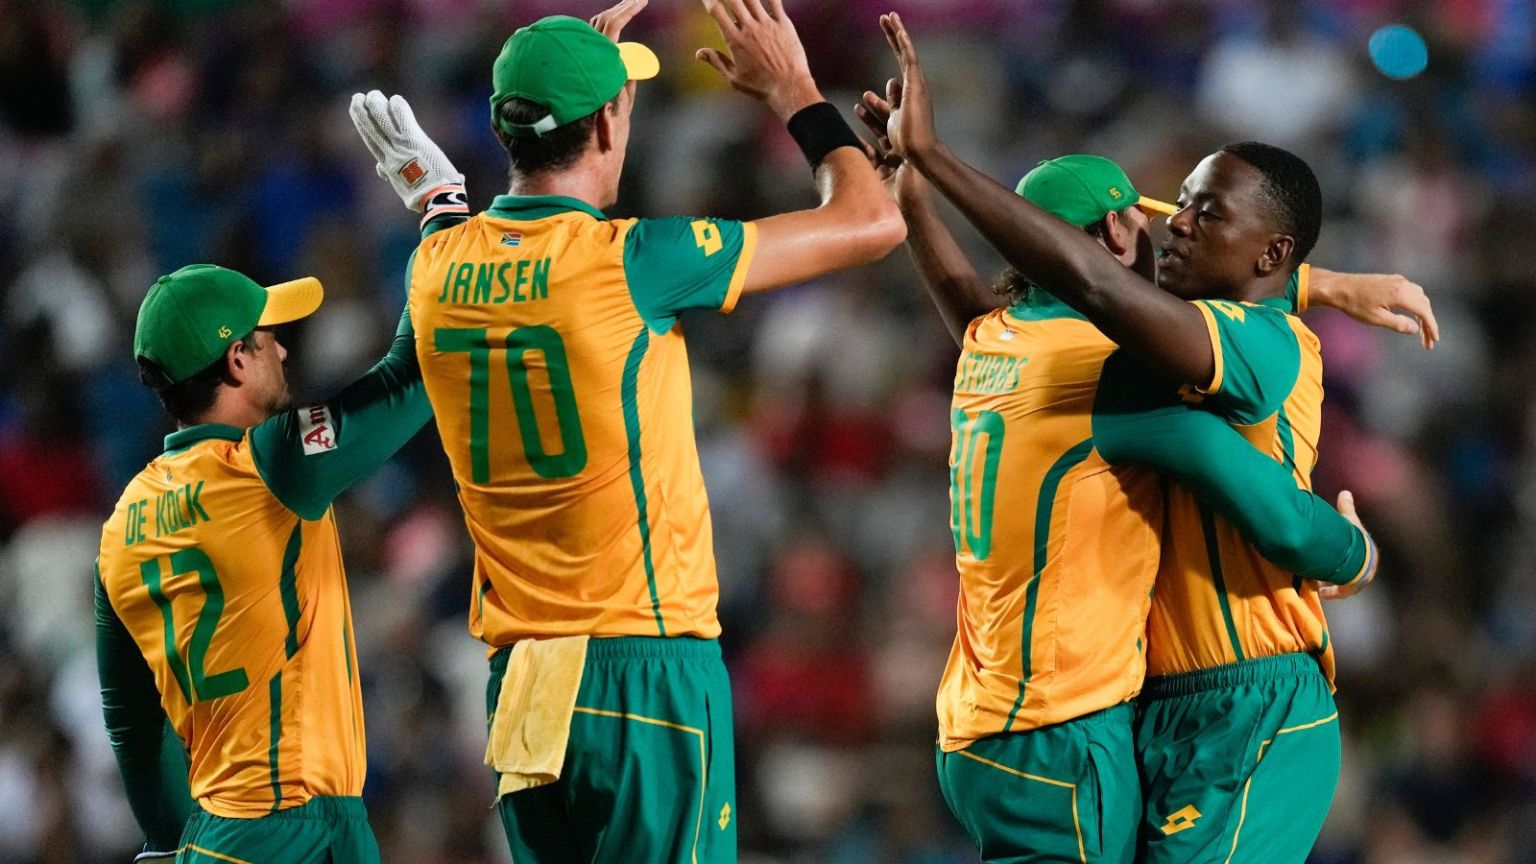 South Africa’s Kagiso Rabada, right, is congratulated by teammates after dismissing Afghanistan’s Ibrahim Zadran during the men’s T20 World Cup semifinal cricket match between Afghanistan and South Africa at the Brian Lara Cricket Academy in Tarouba, Trinidad and Tabago, 